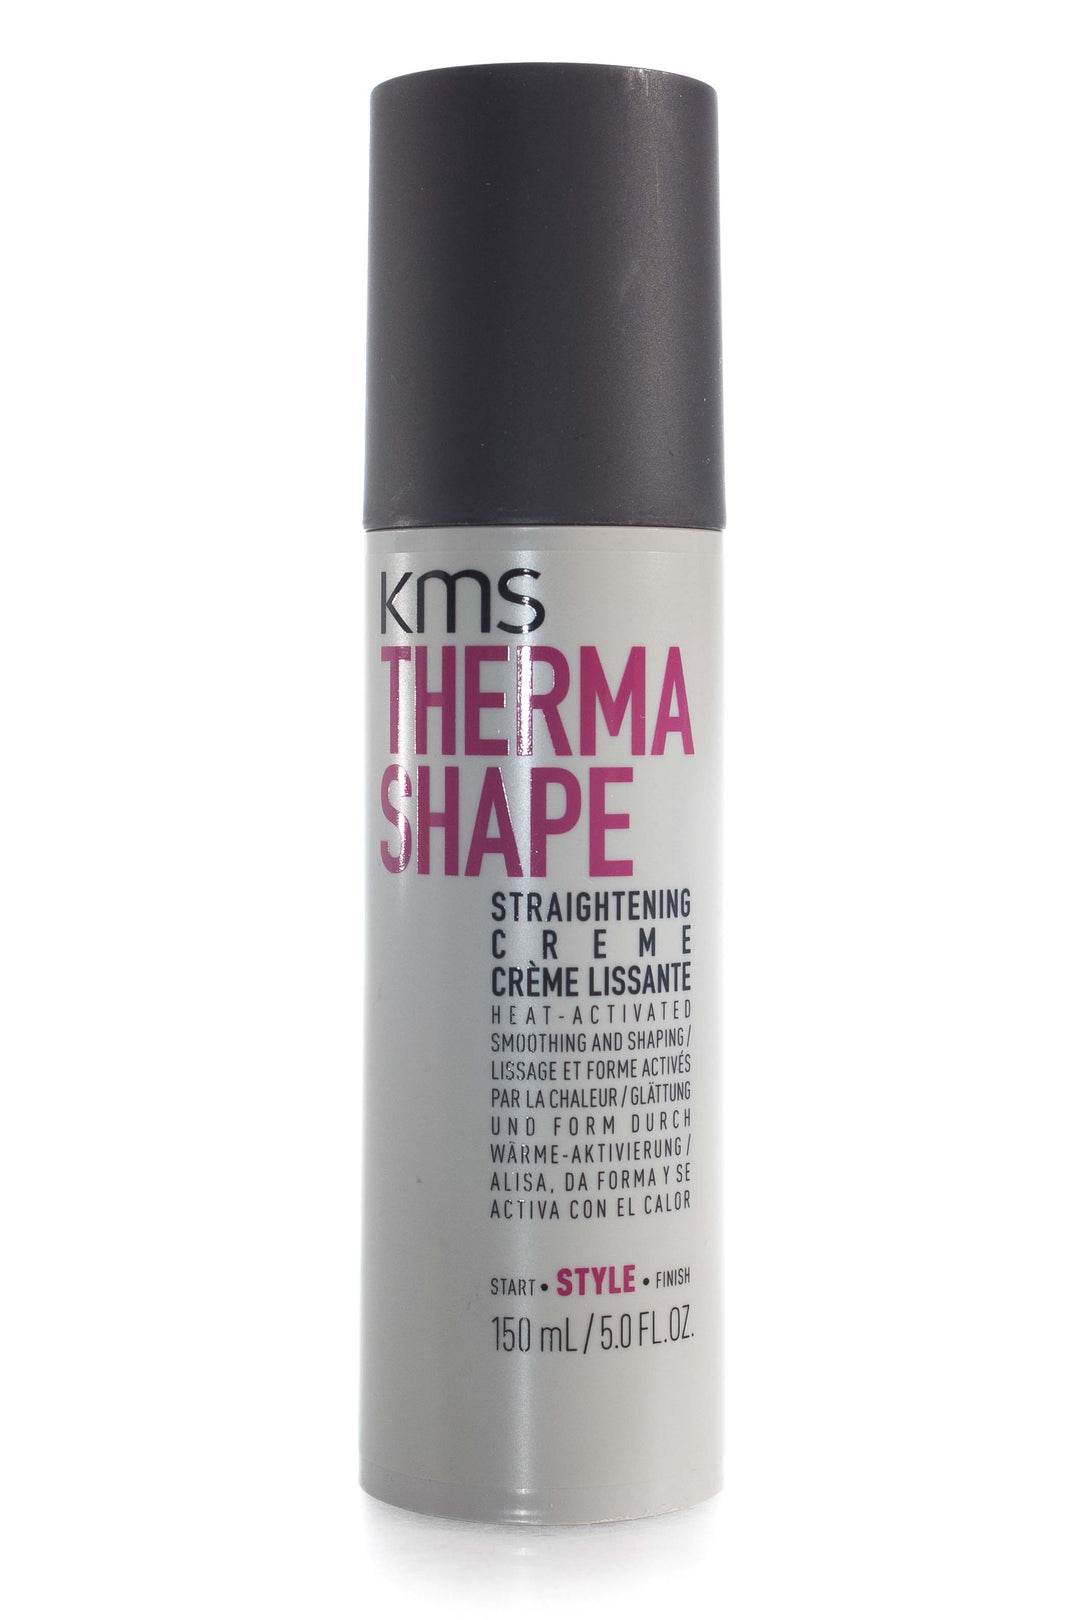 Product Image: KMS Thermashape Straight Creme - 150ml